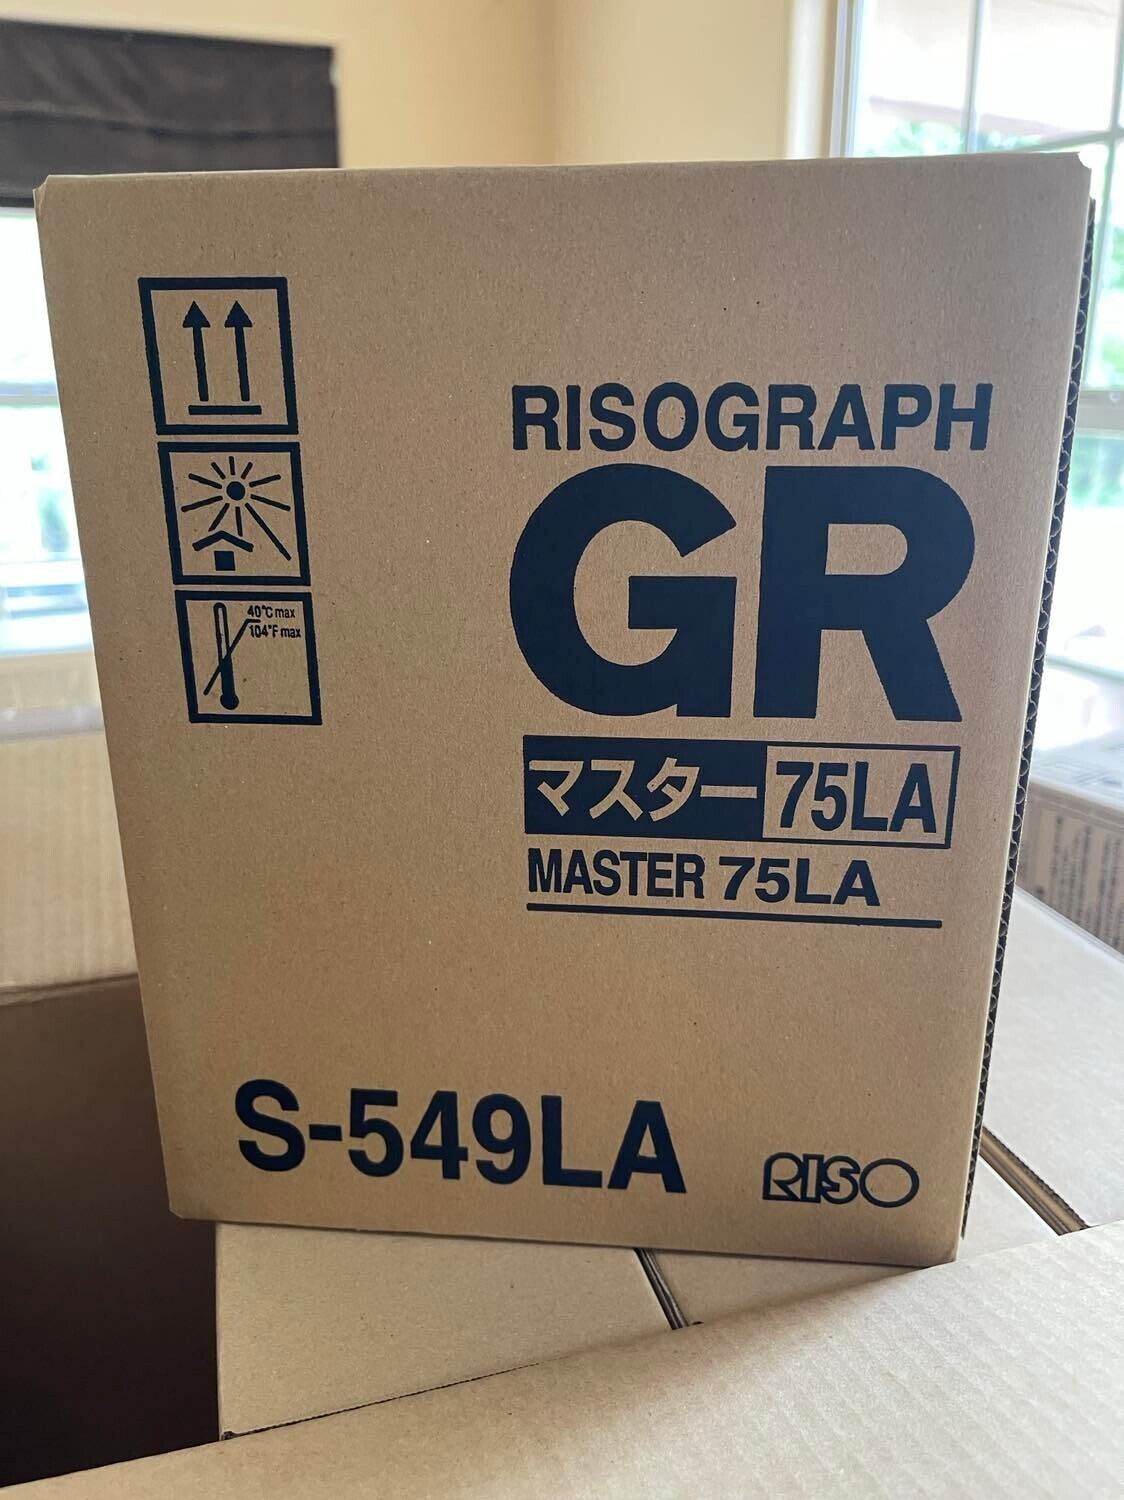 Risograph S-549LA Thermal Masters 75LA  NEW  . 10 boxes available  Best Price